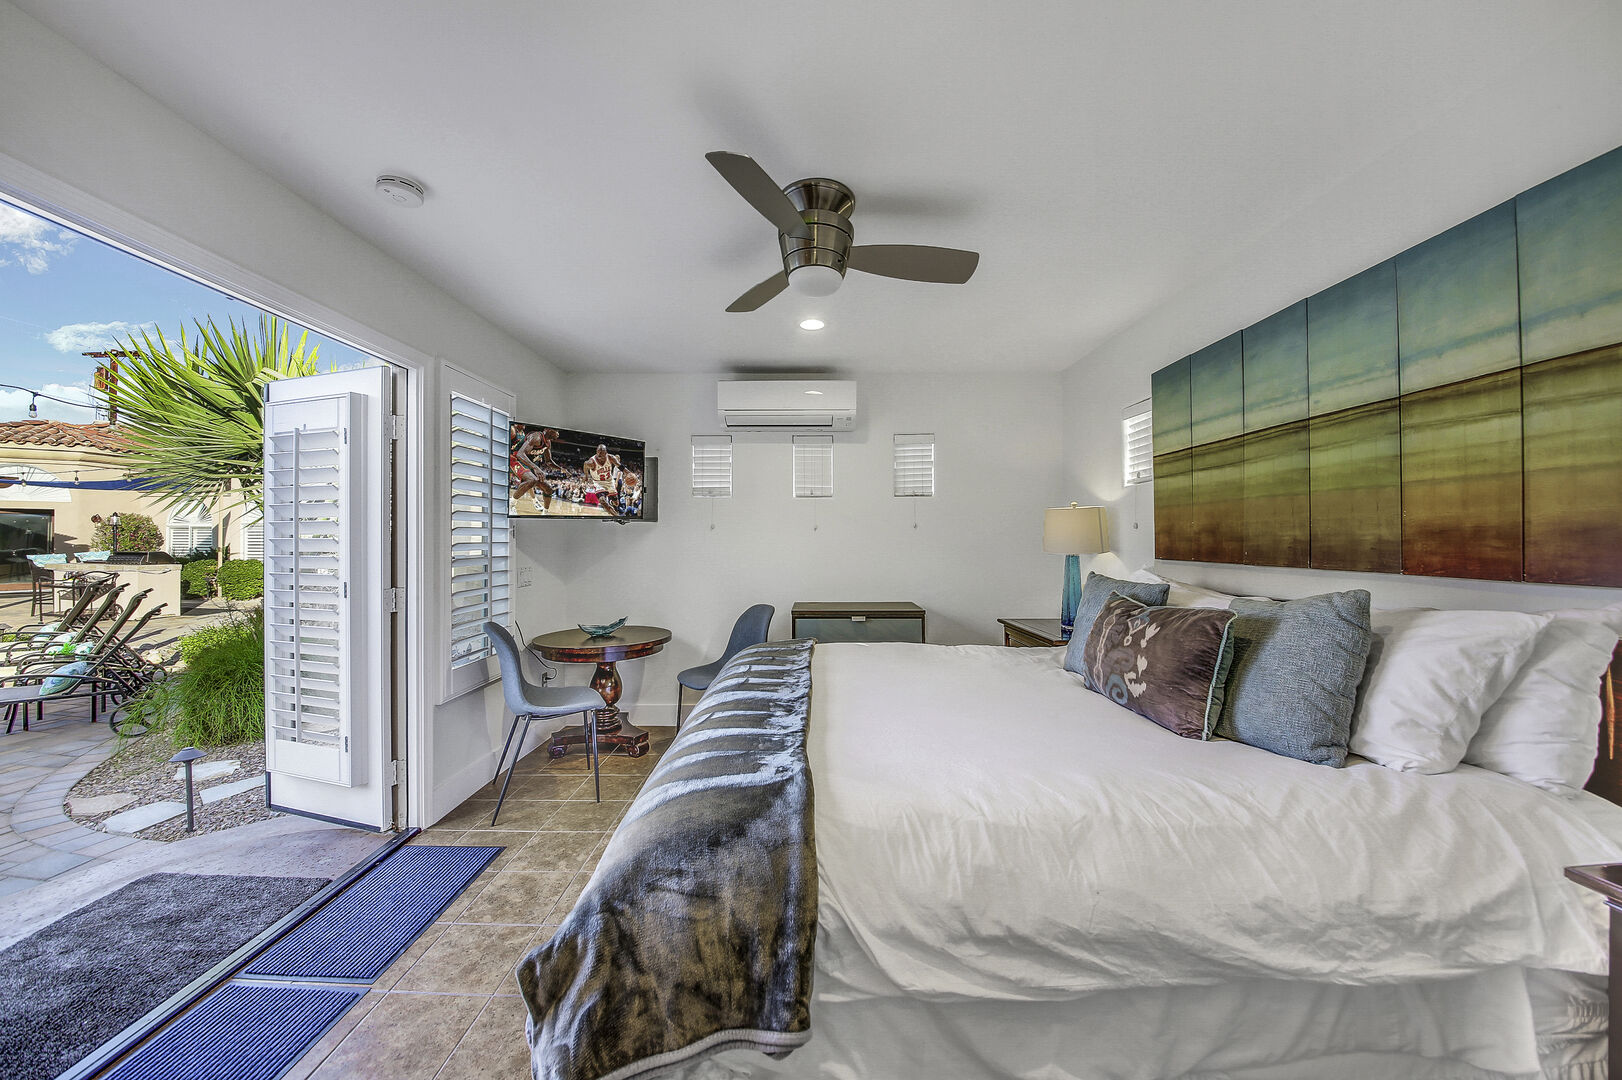 The detached Casita Suite 2 is located to the left of the courtyard gate and features a King-sized Bed.